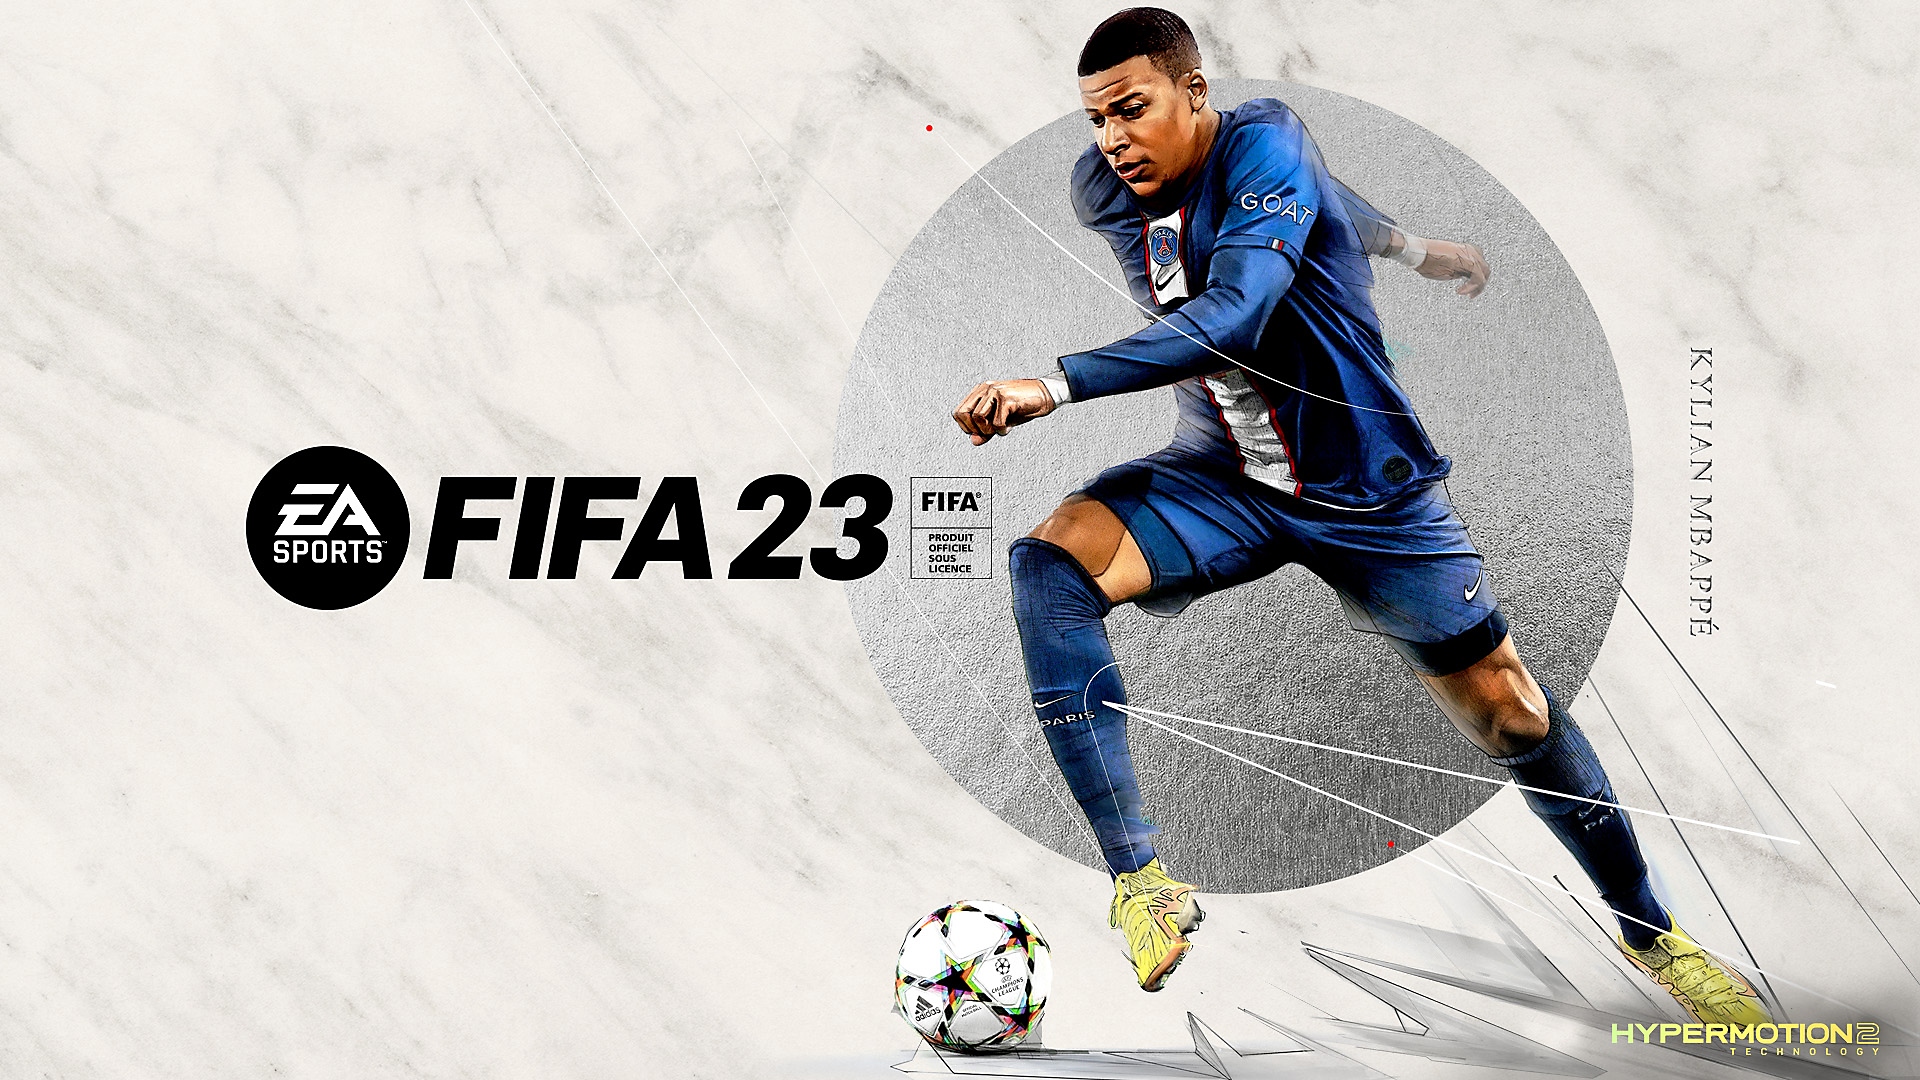 FIFA 23 - The World’s Game Launch Trailer | PS5 & PS4 Games